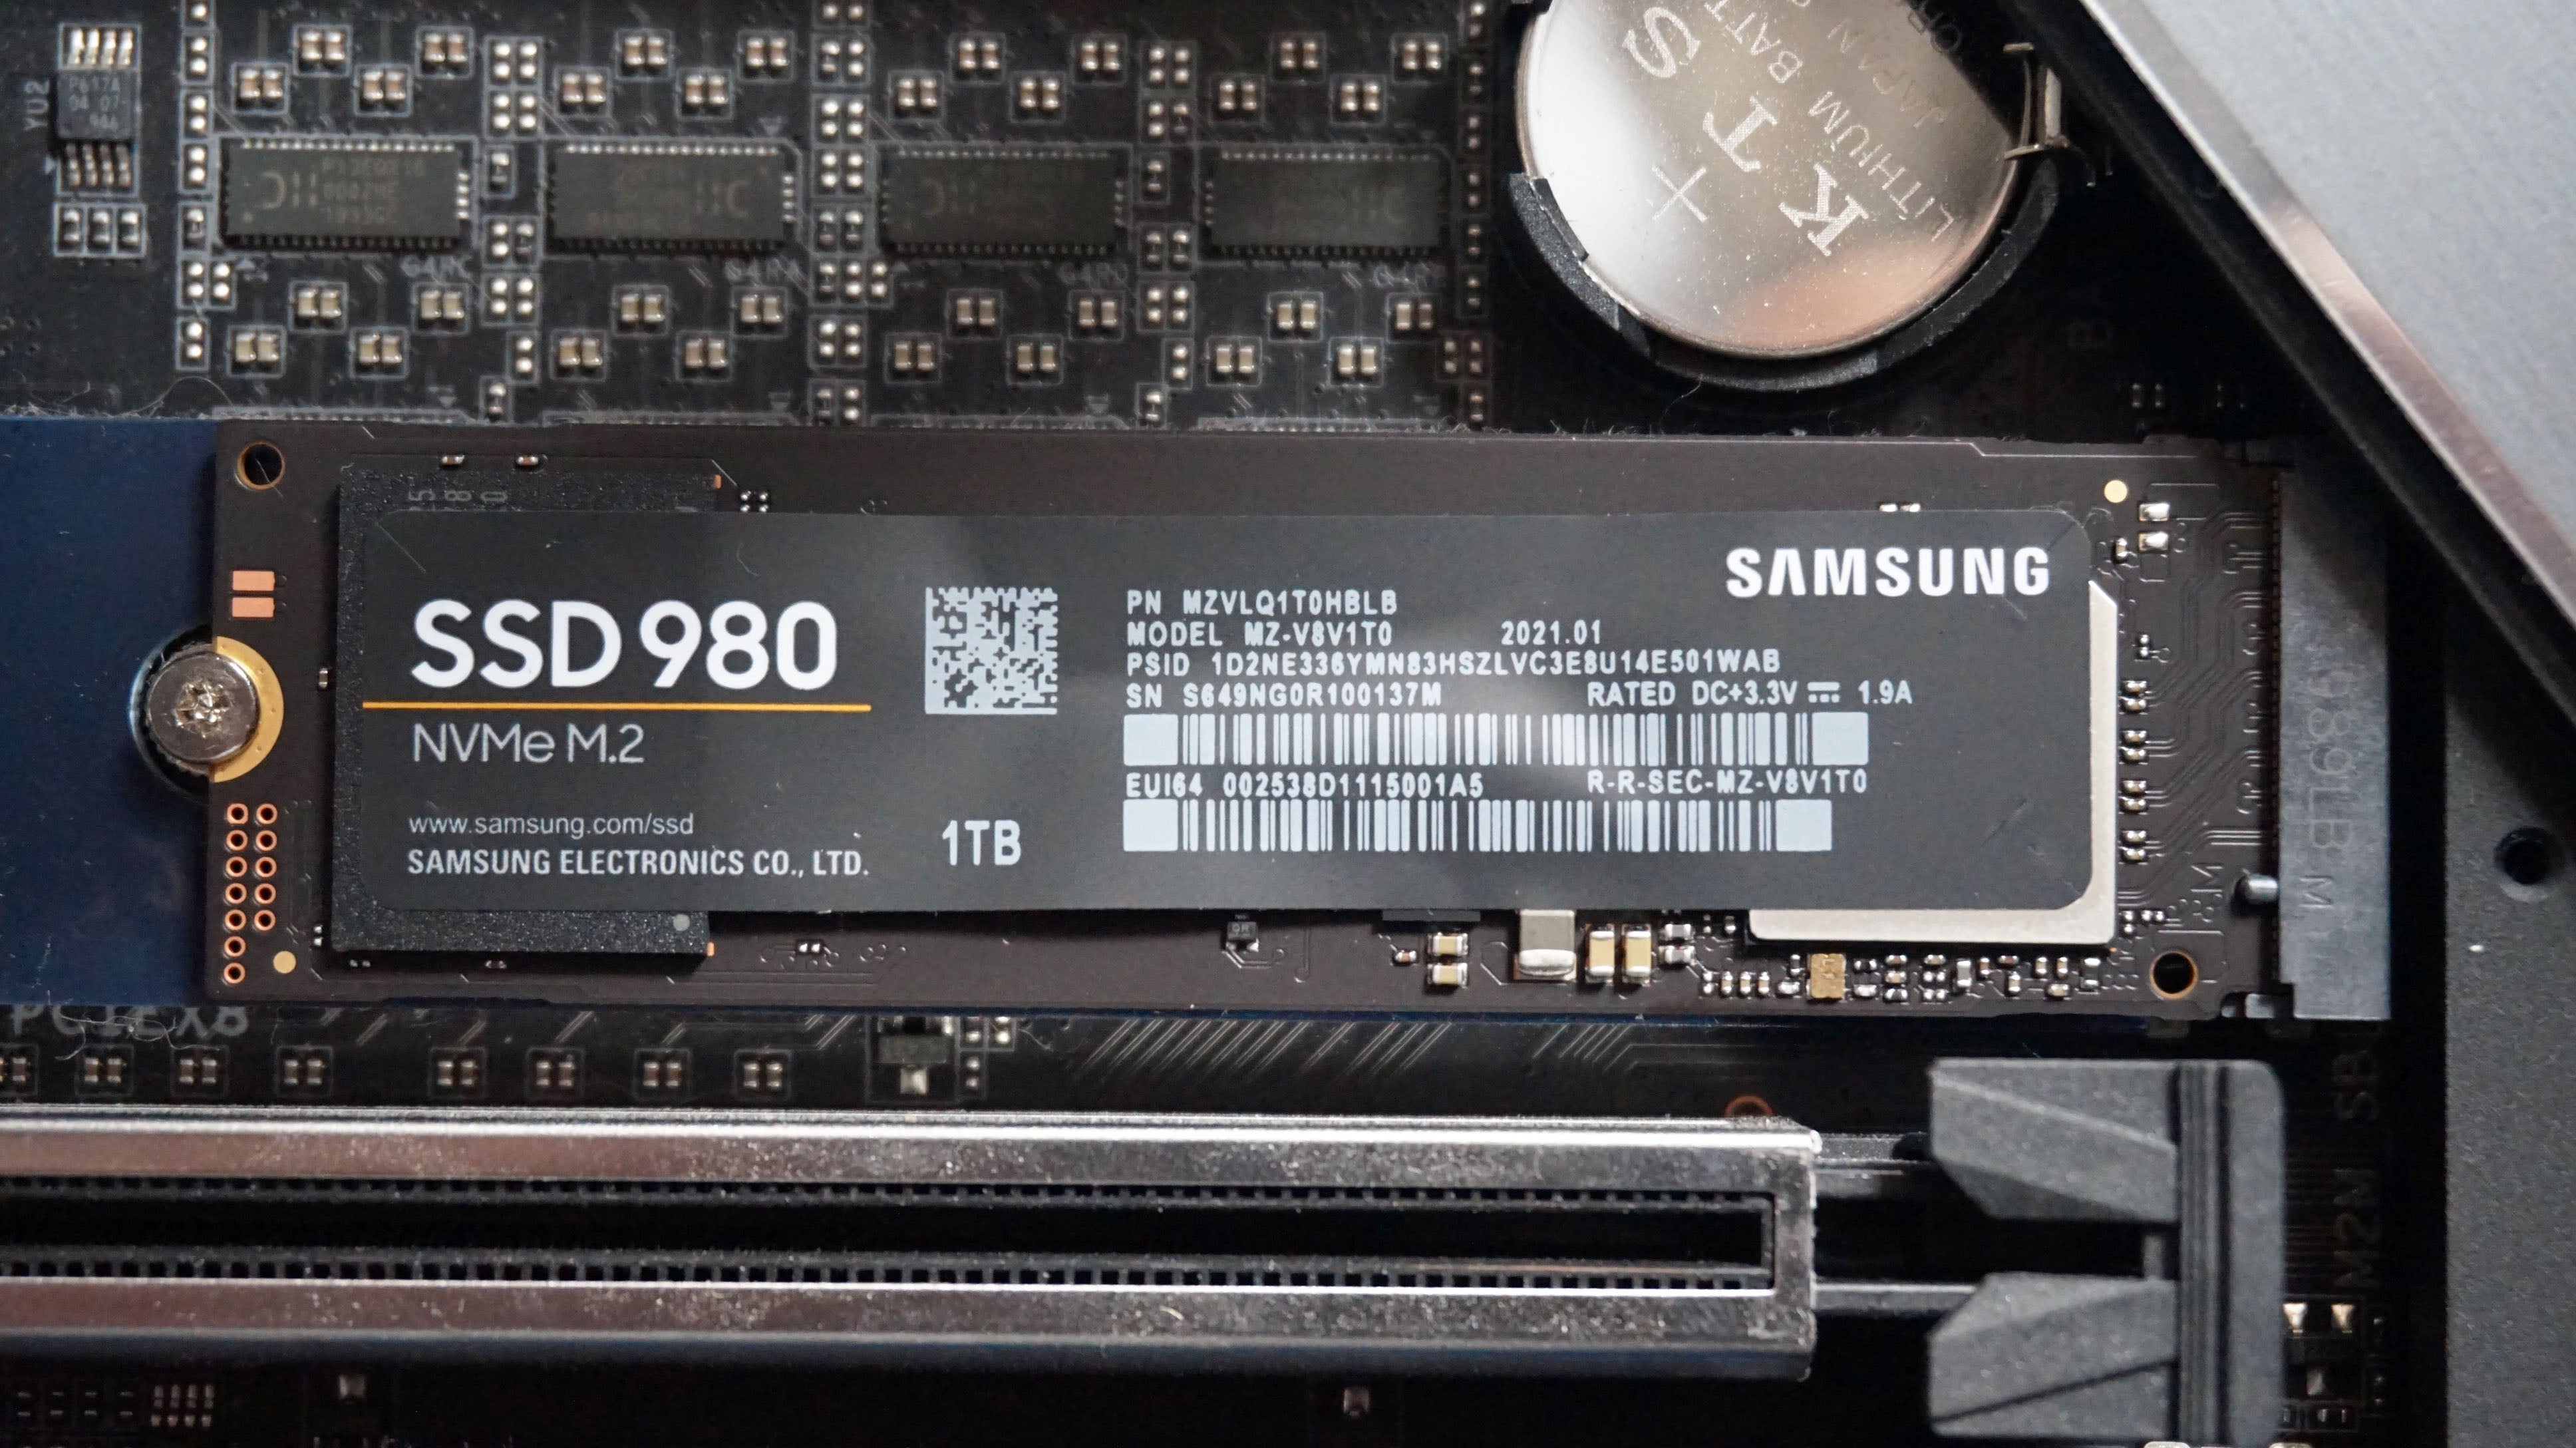 The Samsung 980 SSD connected to an M.2 slot on a motherboard inside a PC